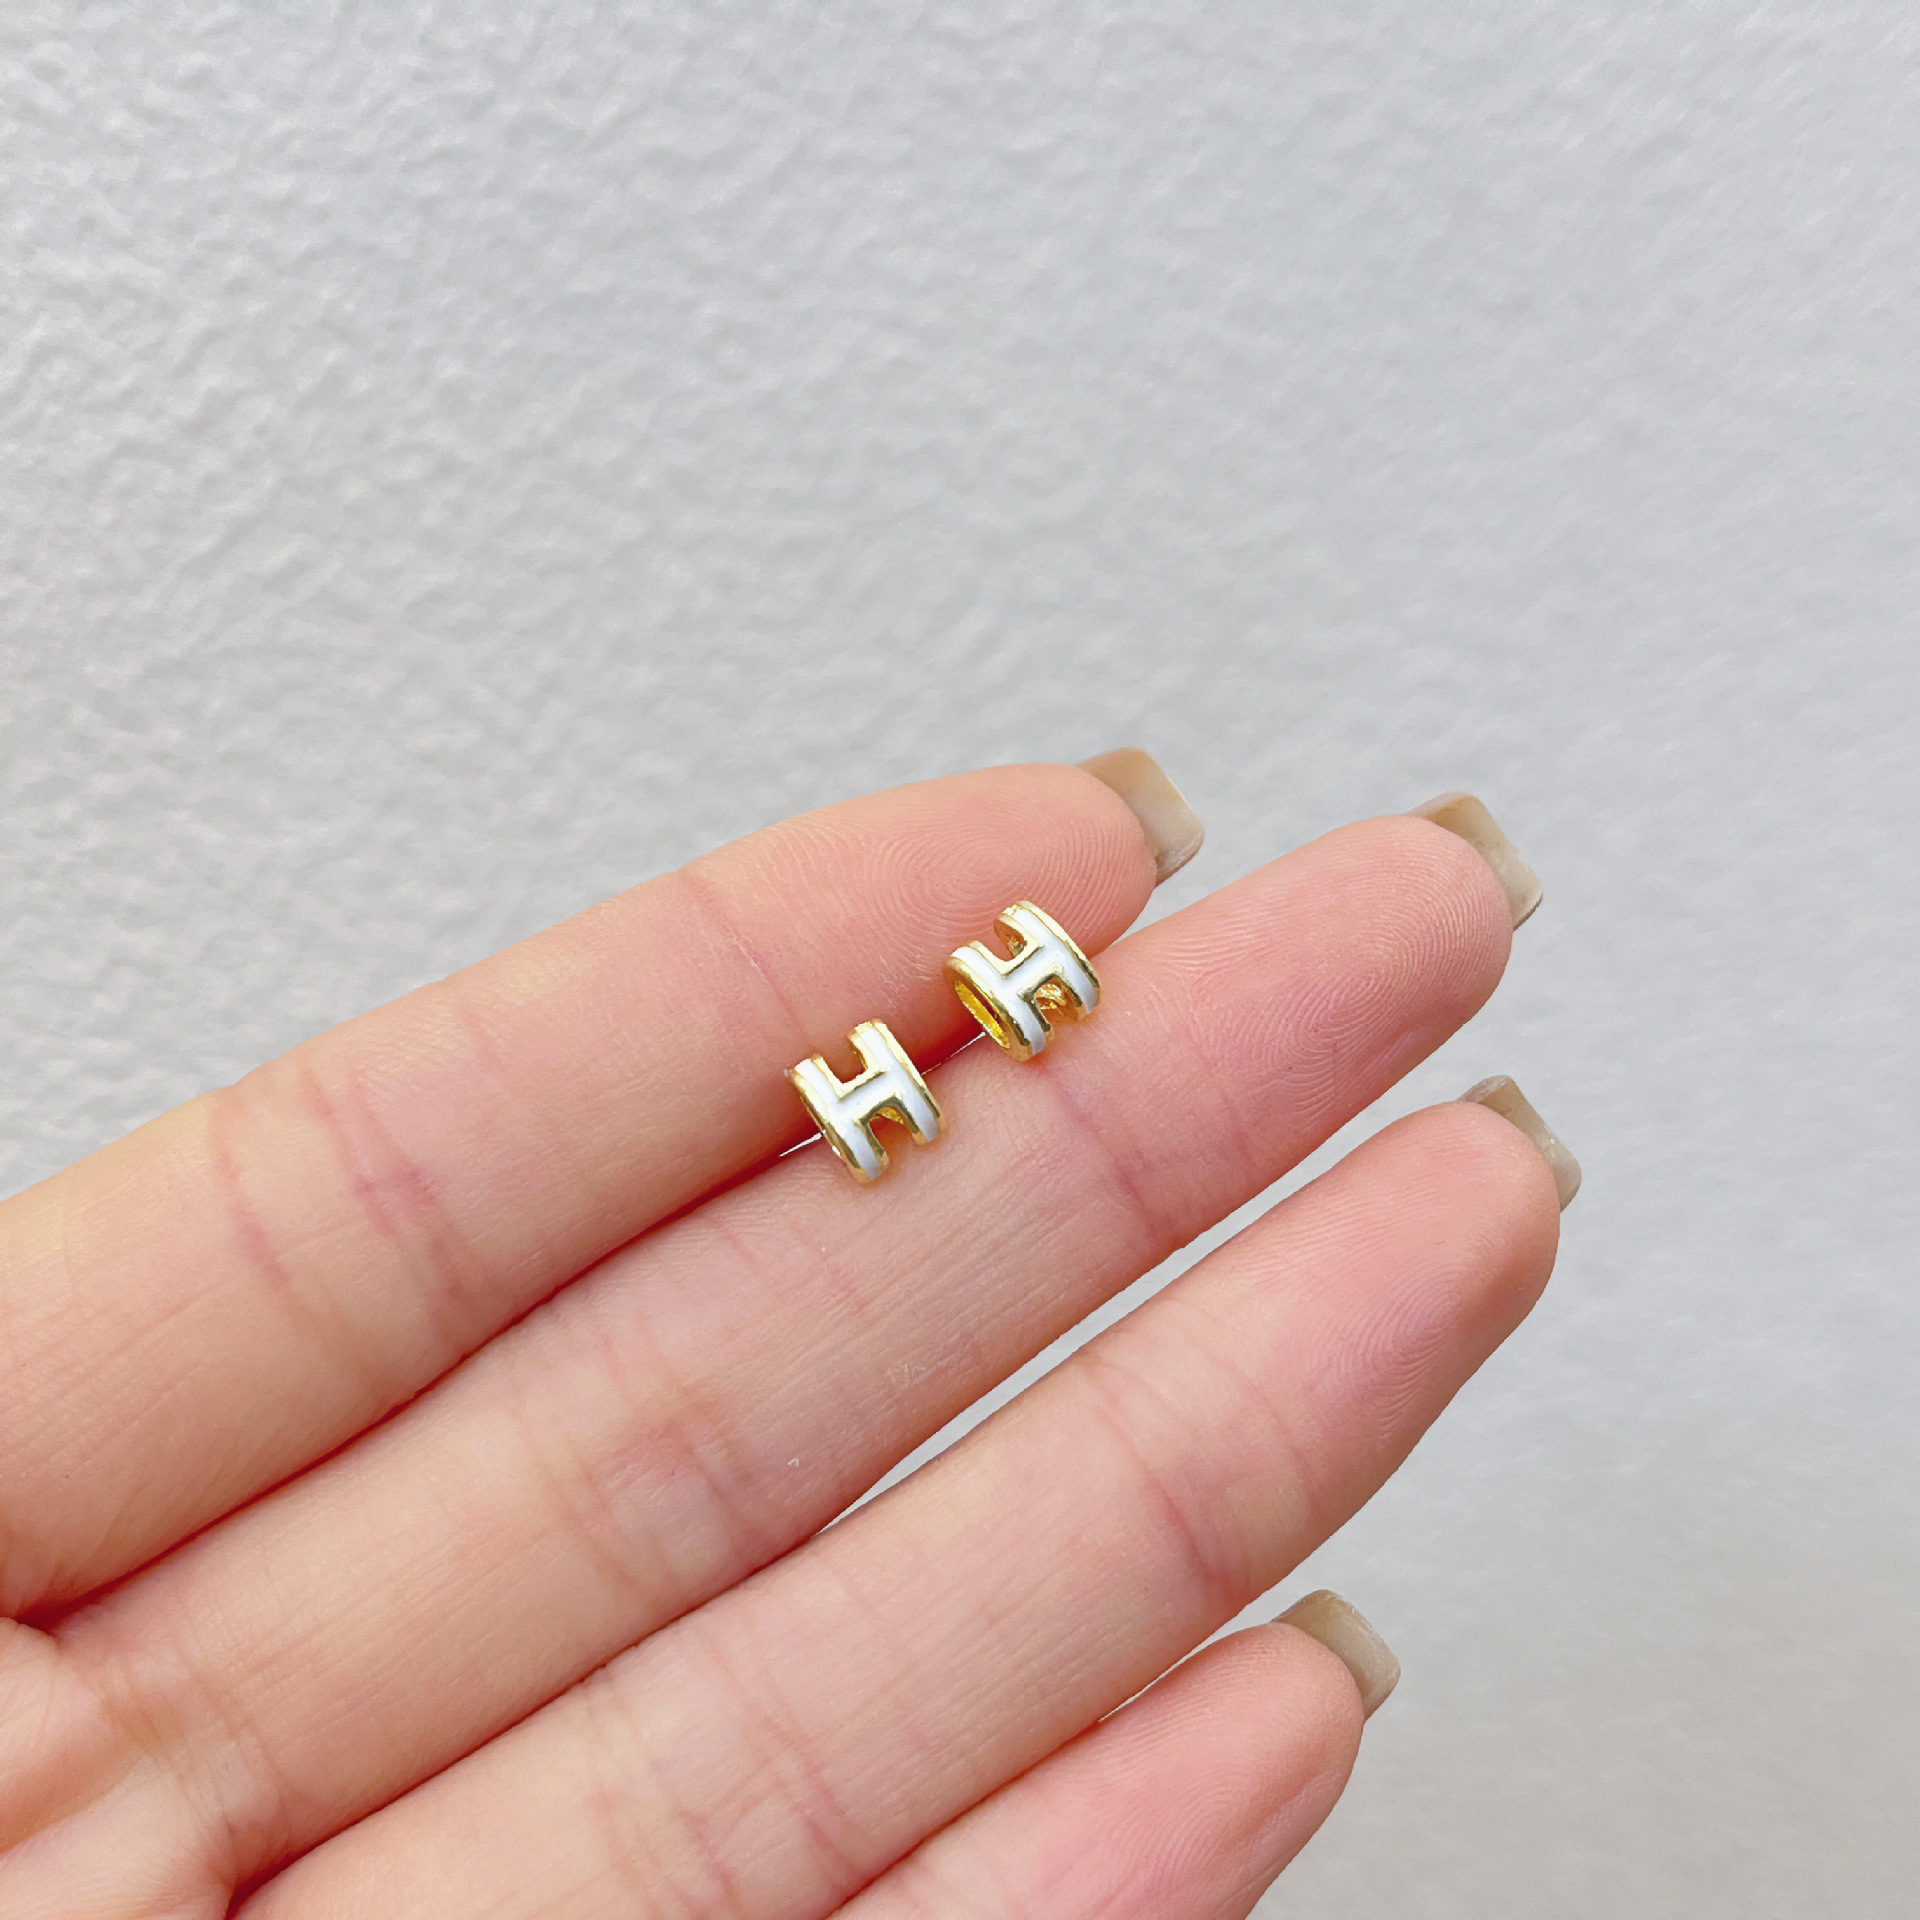 [Collection 2] 925 Silver Needle Stud Earrings Female Students Drop Oil Colorful Cute Live Hot Earrings Wholesale